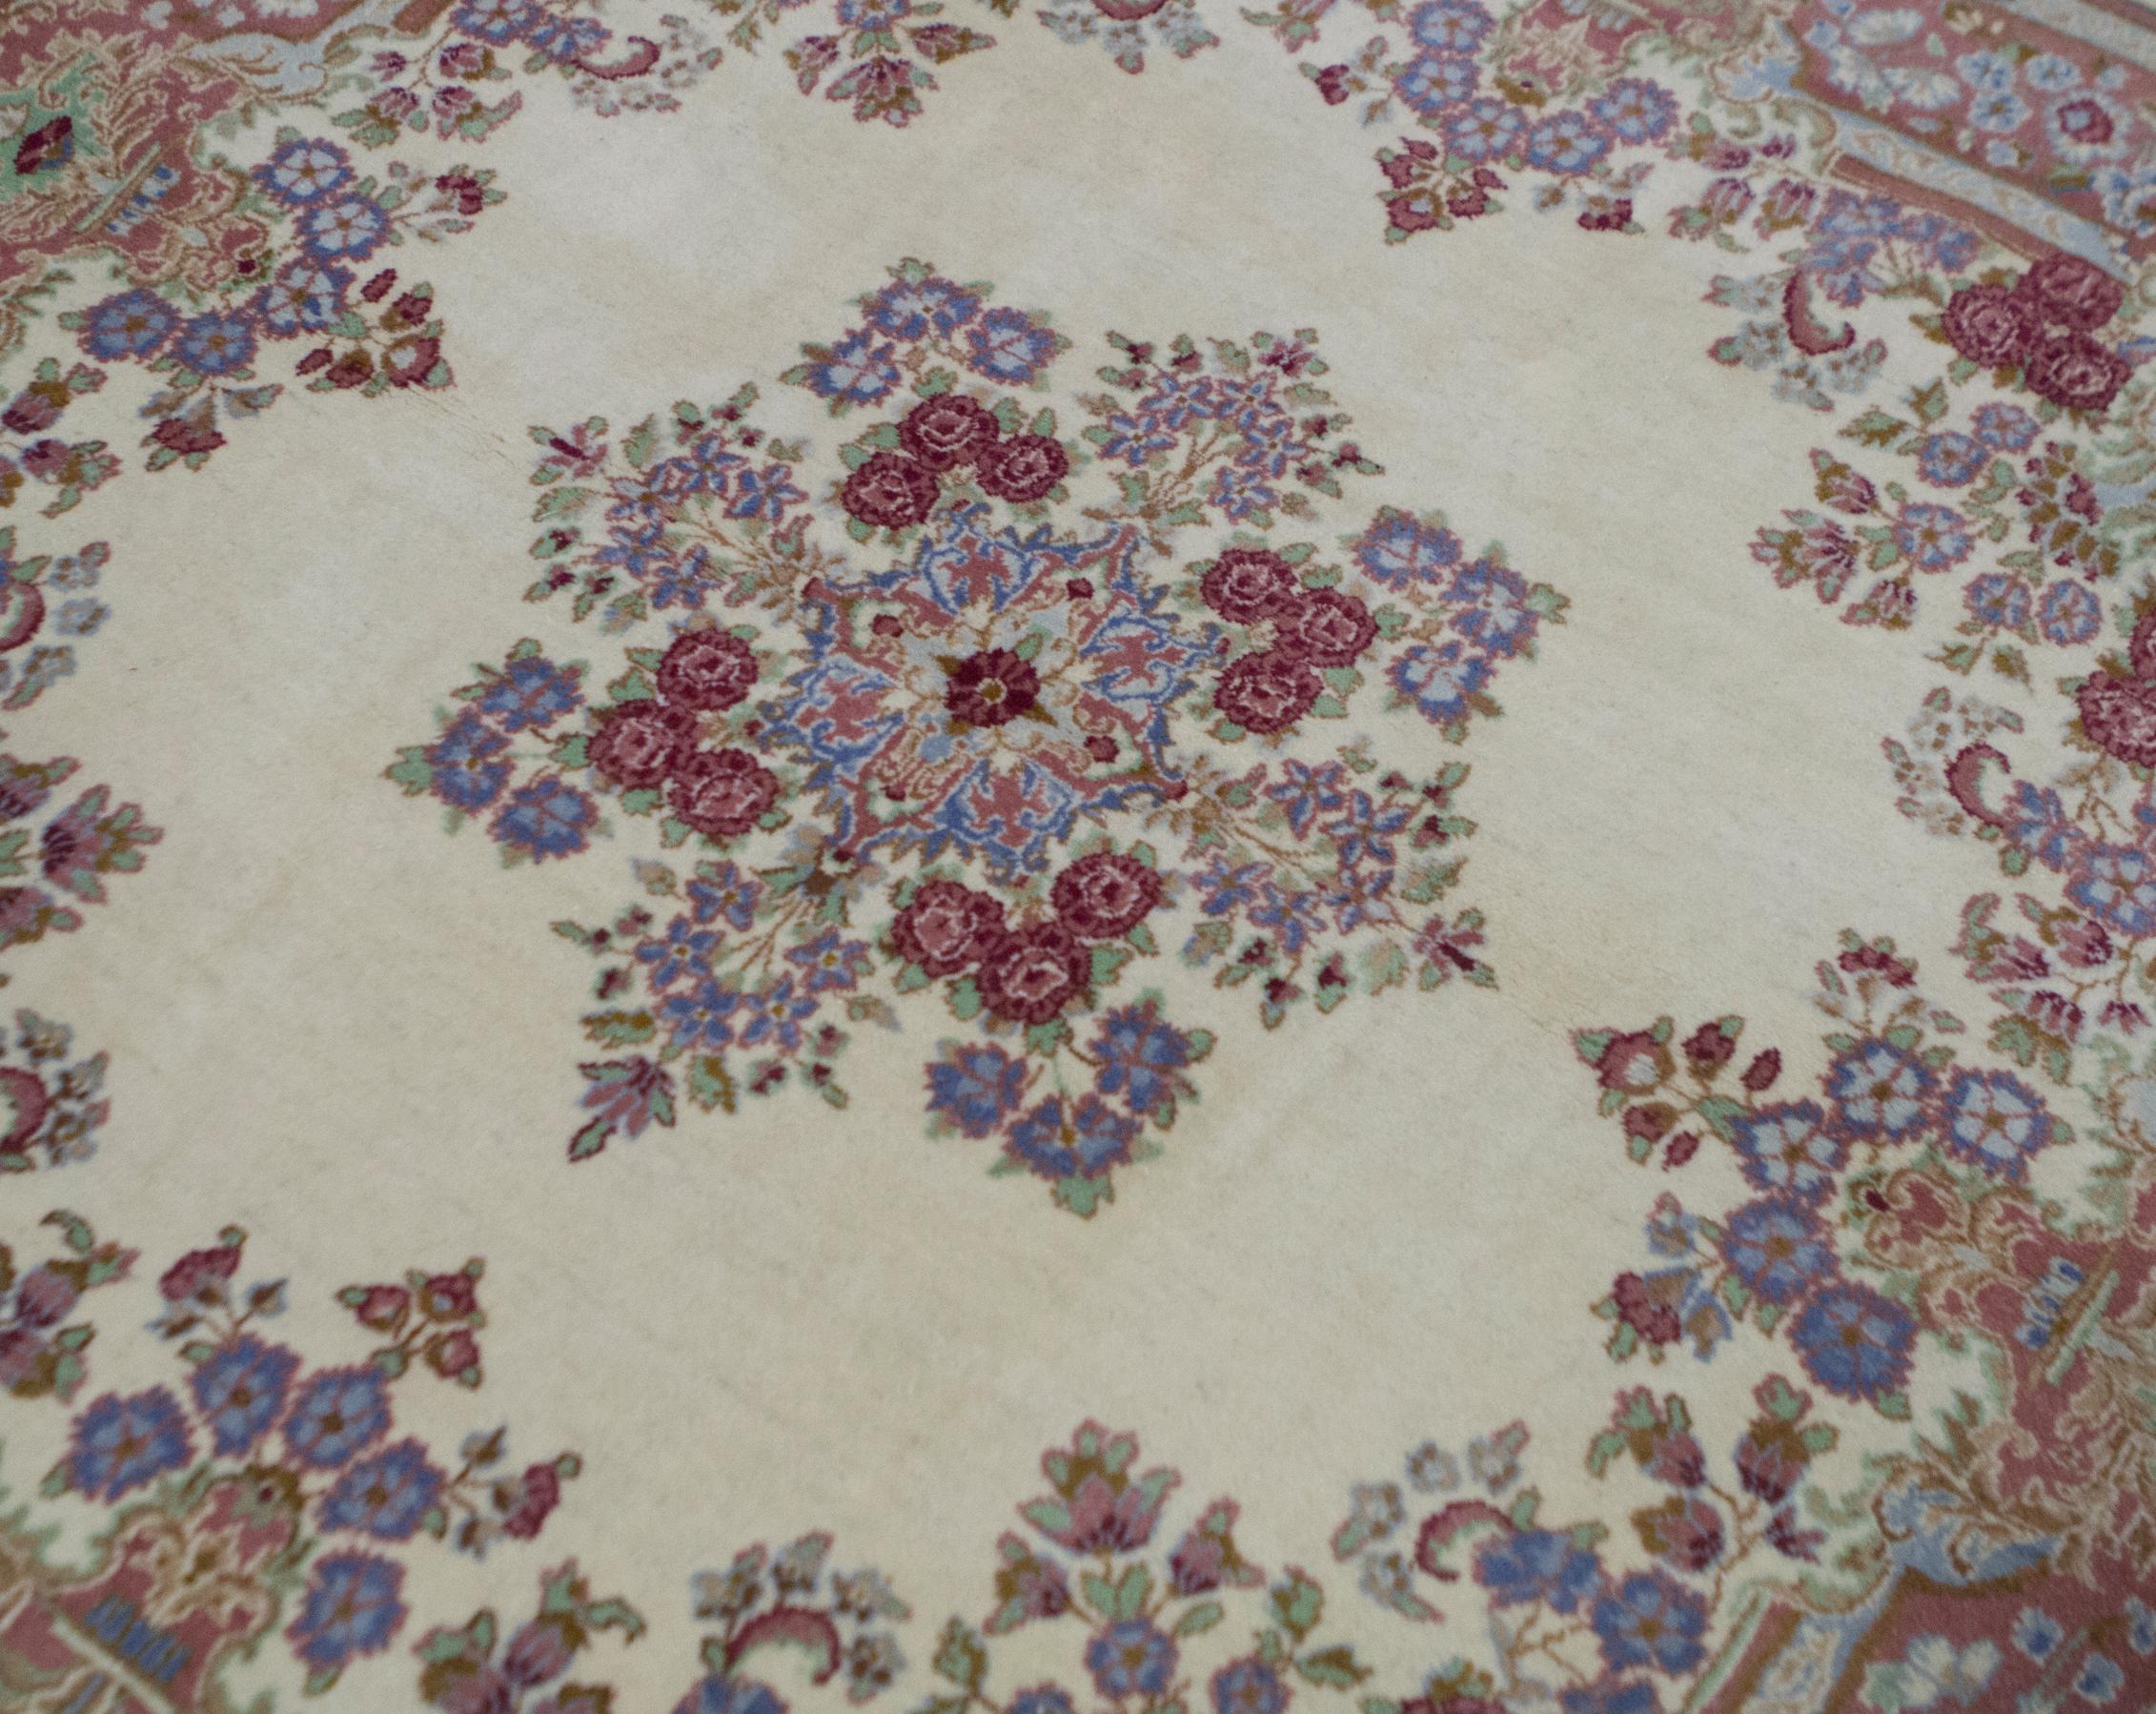 Vintage square Persian Kerman rug, circa 1940. Although small in size this vintage Kerman rug incorporates a tremendous amount of detail in the composition with the floral elements repeated in the medallion and surrounding borders, the soft ivory